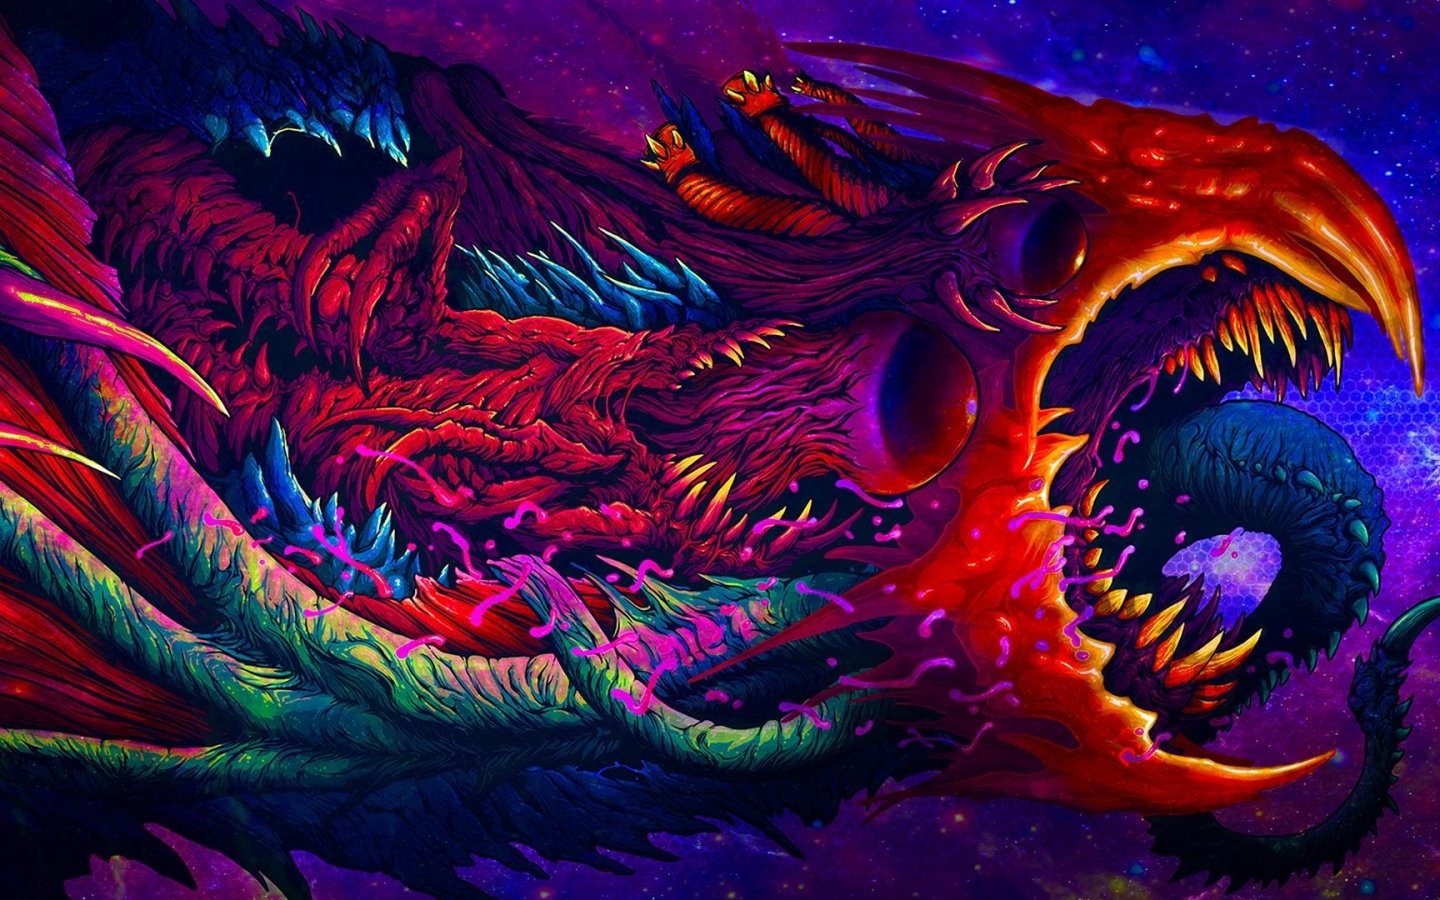 1440x900 Hyper Beast Csgo Art Cool 1440x900 Wallpaper Hd Games 4k Wallpapers Images Photos And Background